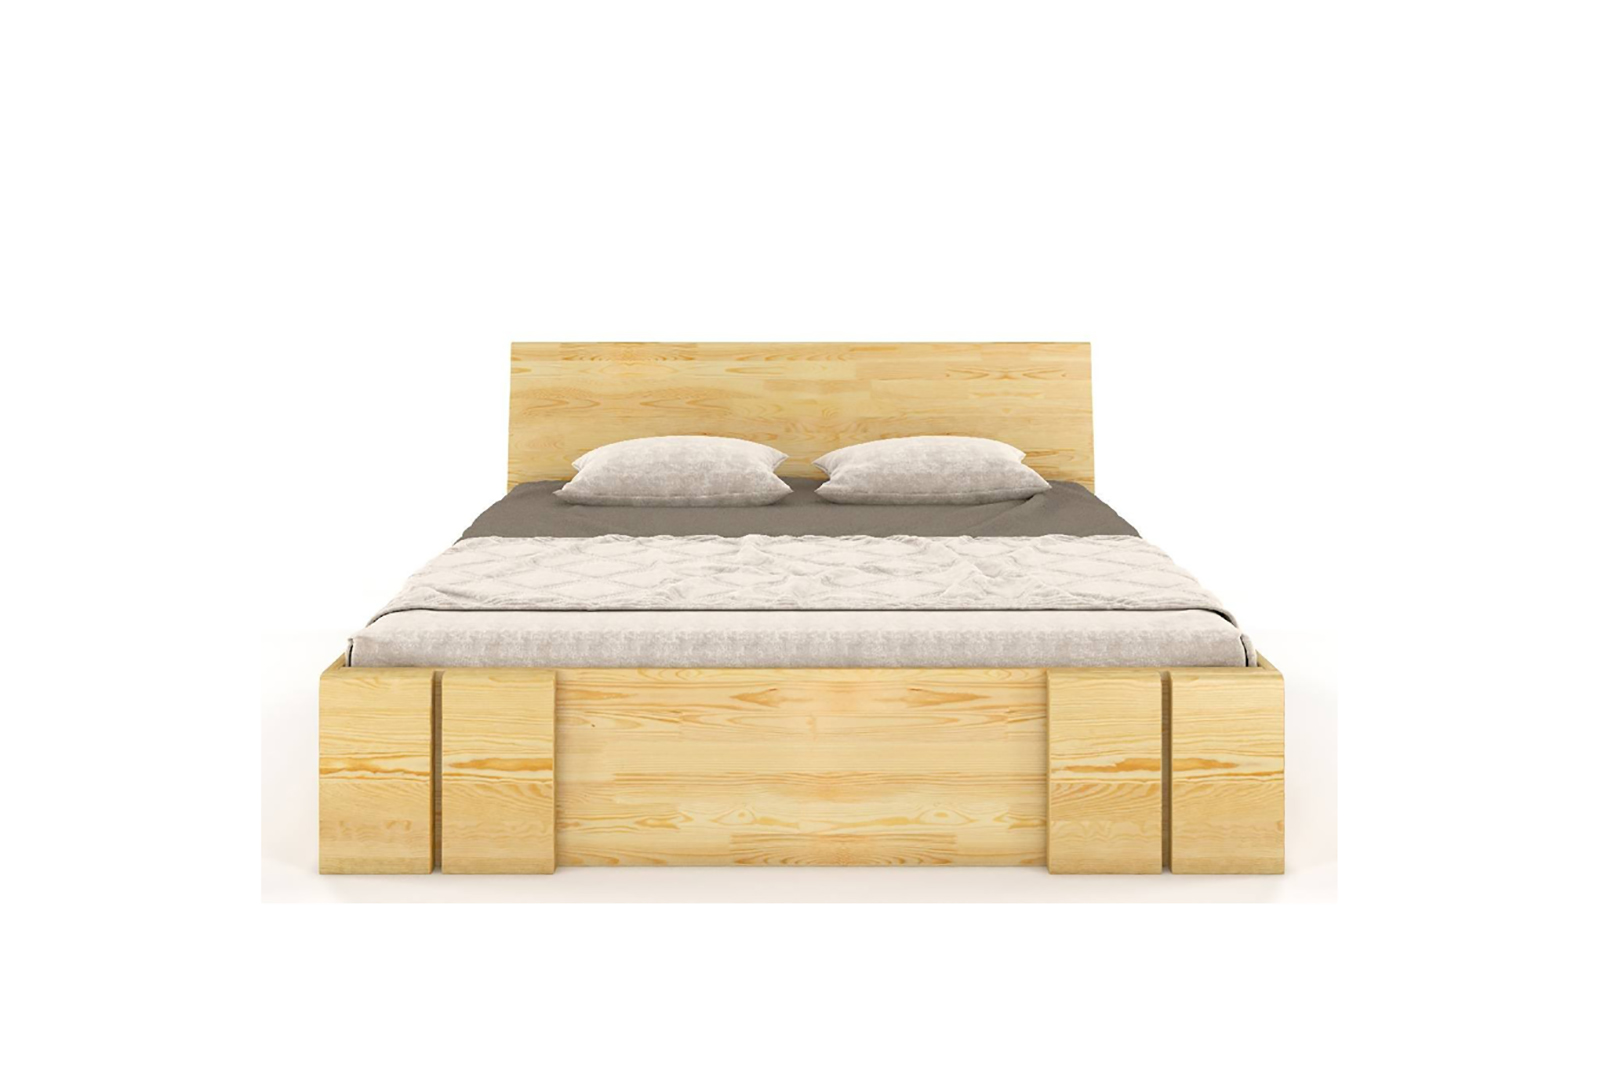 WOODEN PINE BED WITH DRAWERS SKANDICA VESTRE MAXI AND DR